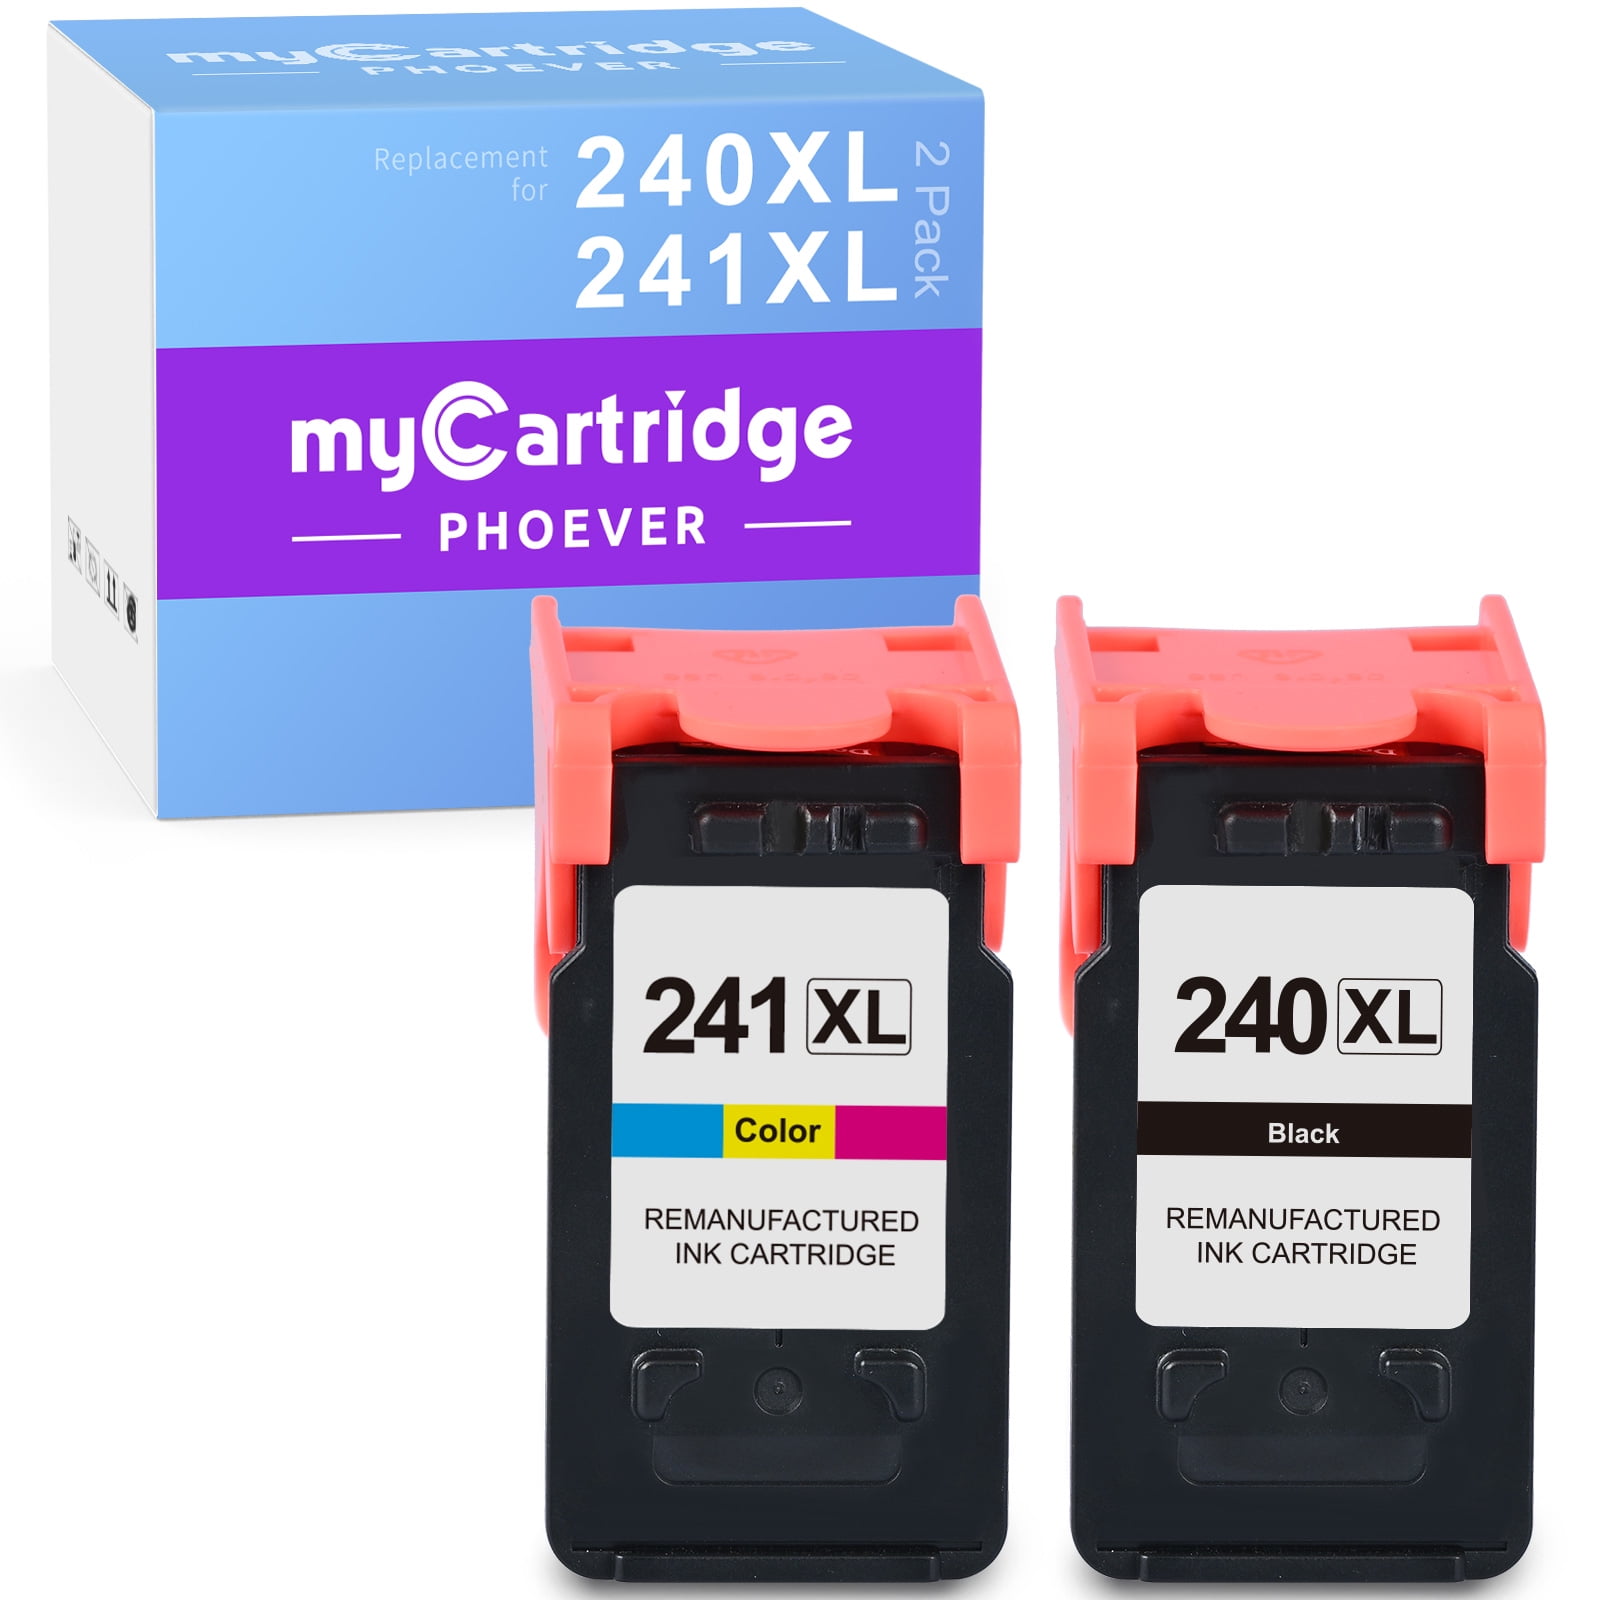 1 Pack CKMY Remanufactured PG 240 Black Ink Cartridge Replacement for Canon 240 XL PG-240XL Used for Canon Pixma MG3620 TS5120 MG3600 MG3520 TS5100 MX472 MG3222 MG3220 MX452 MX432 MG3122 Printer 